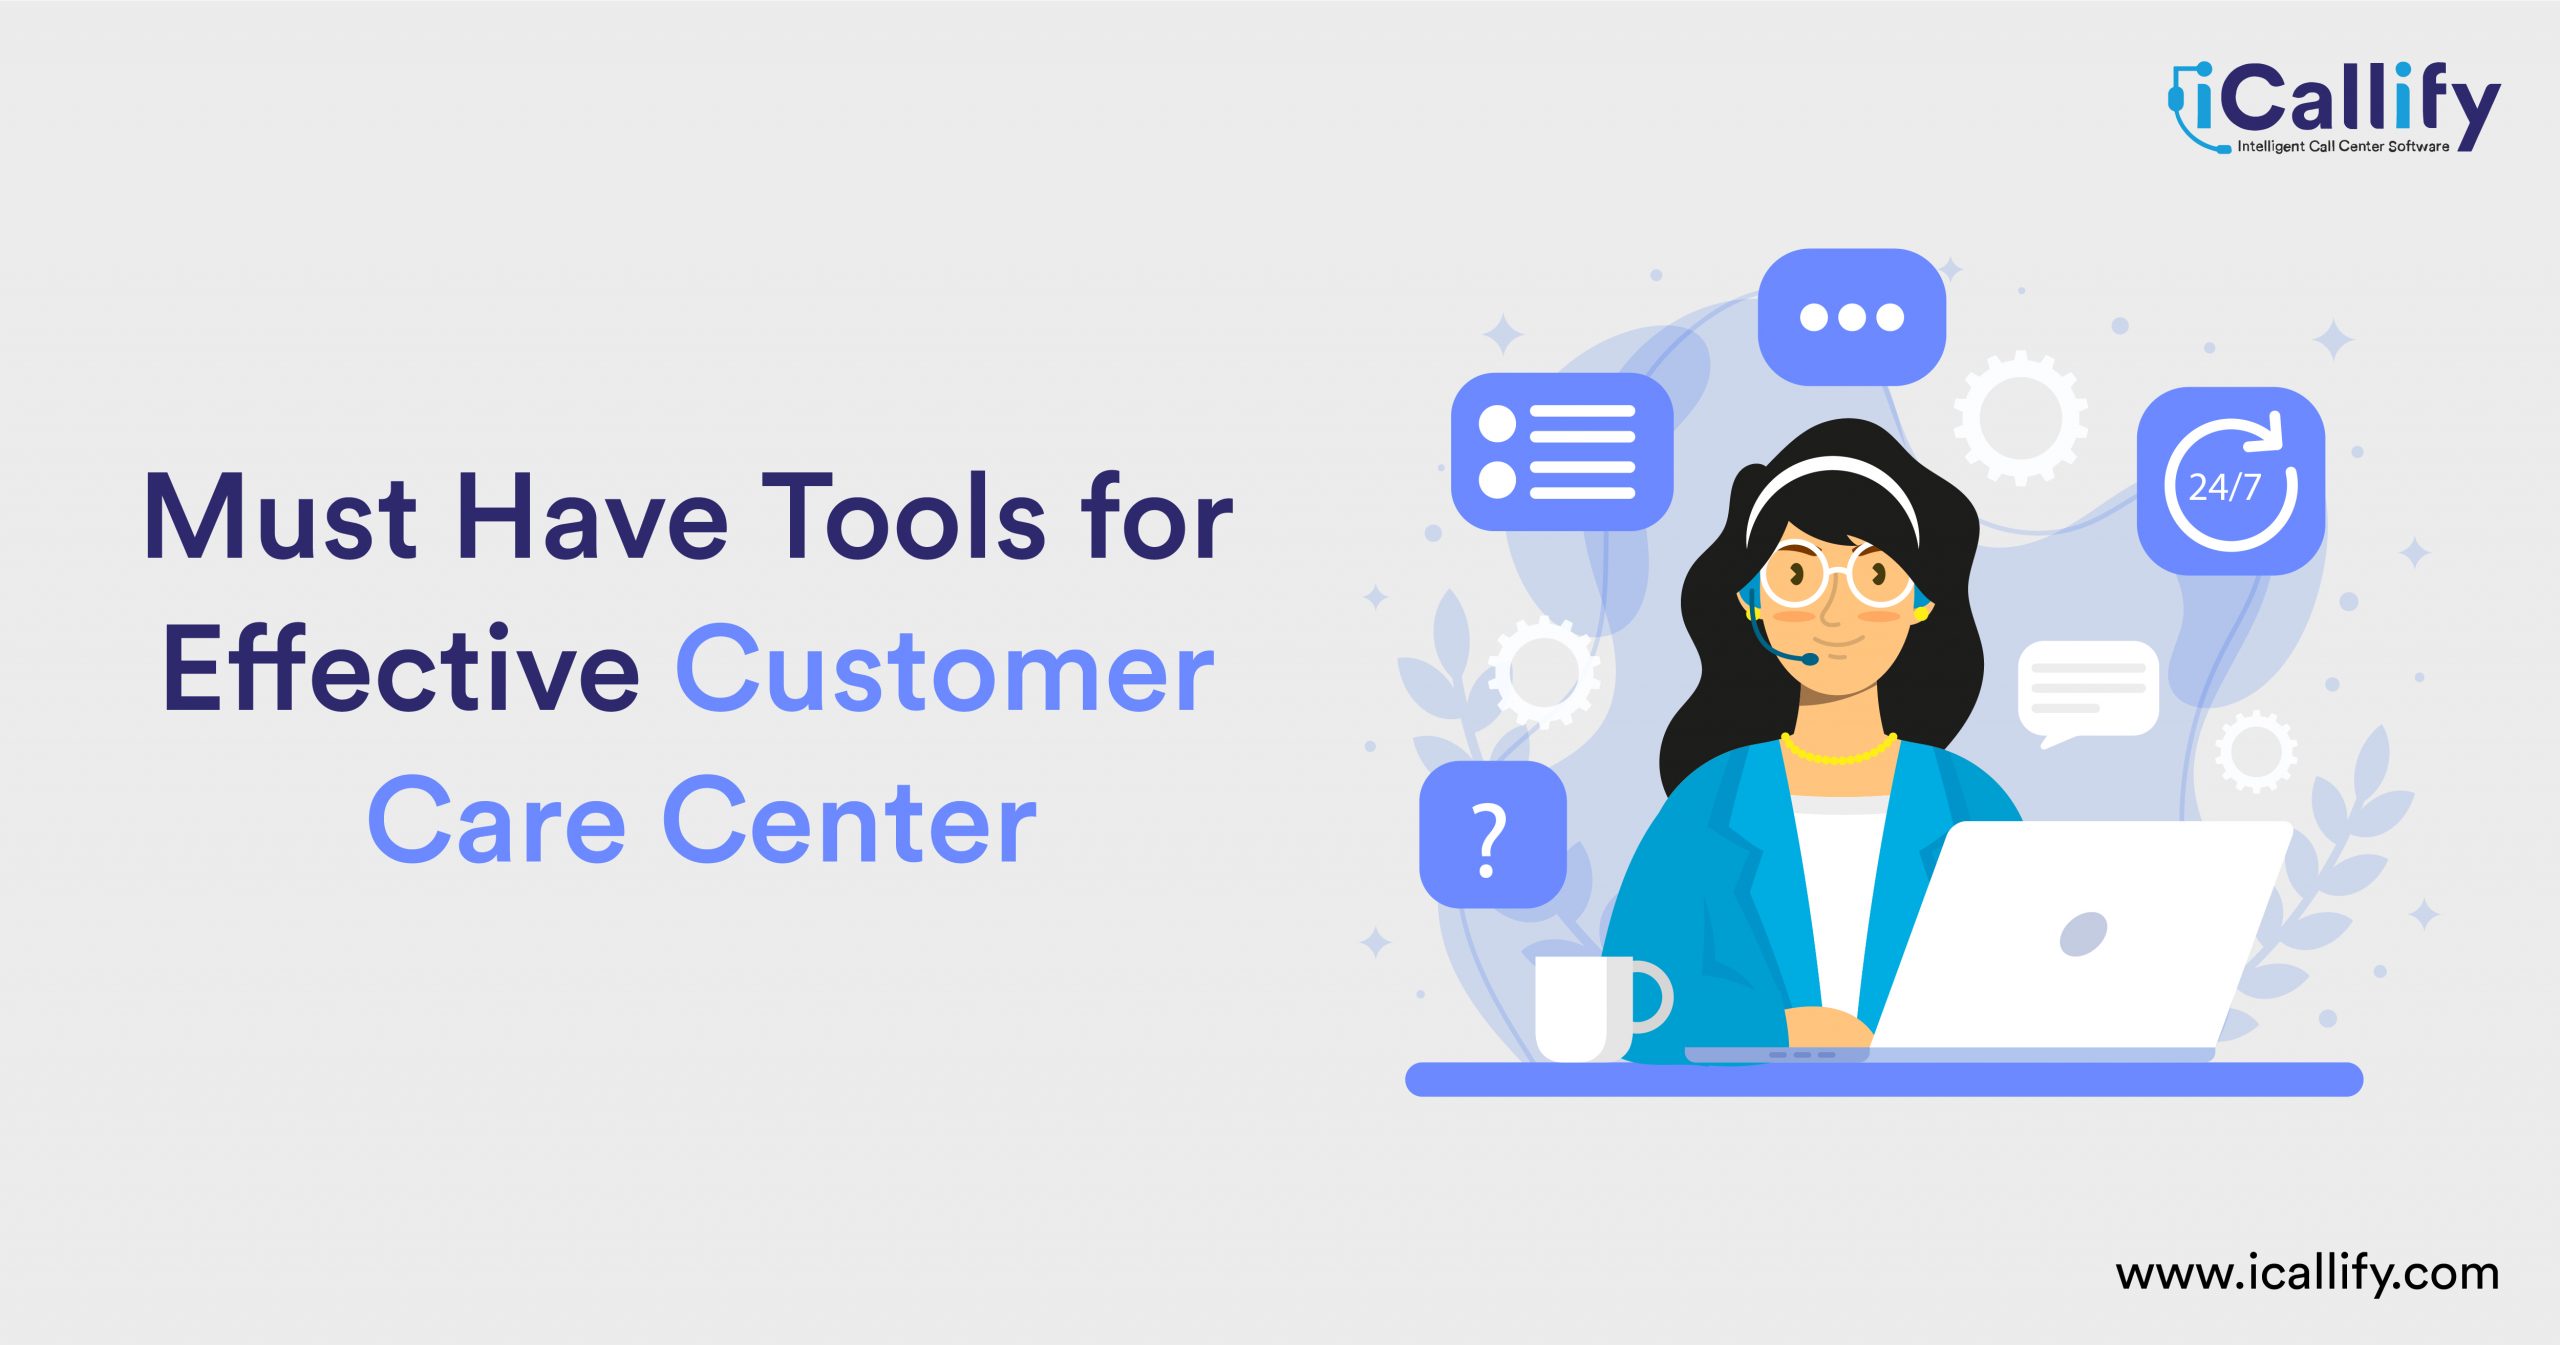 Must Have Tools for Effective Customer Care Center